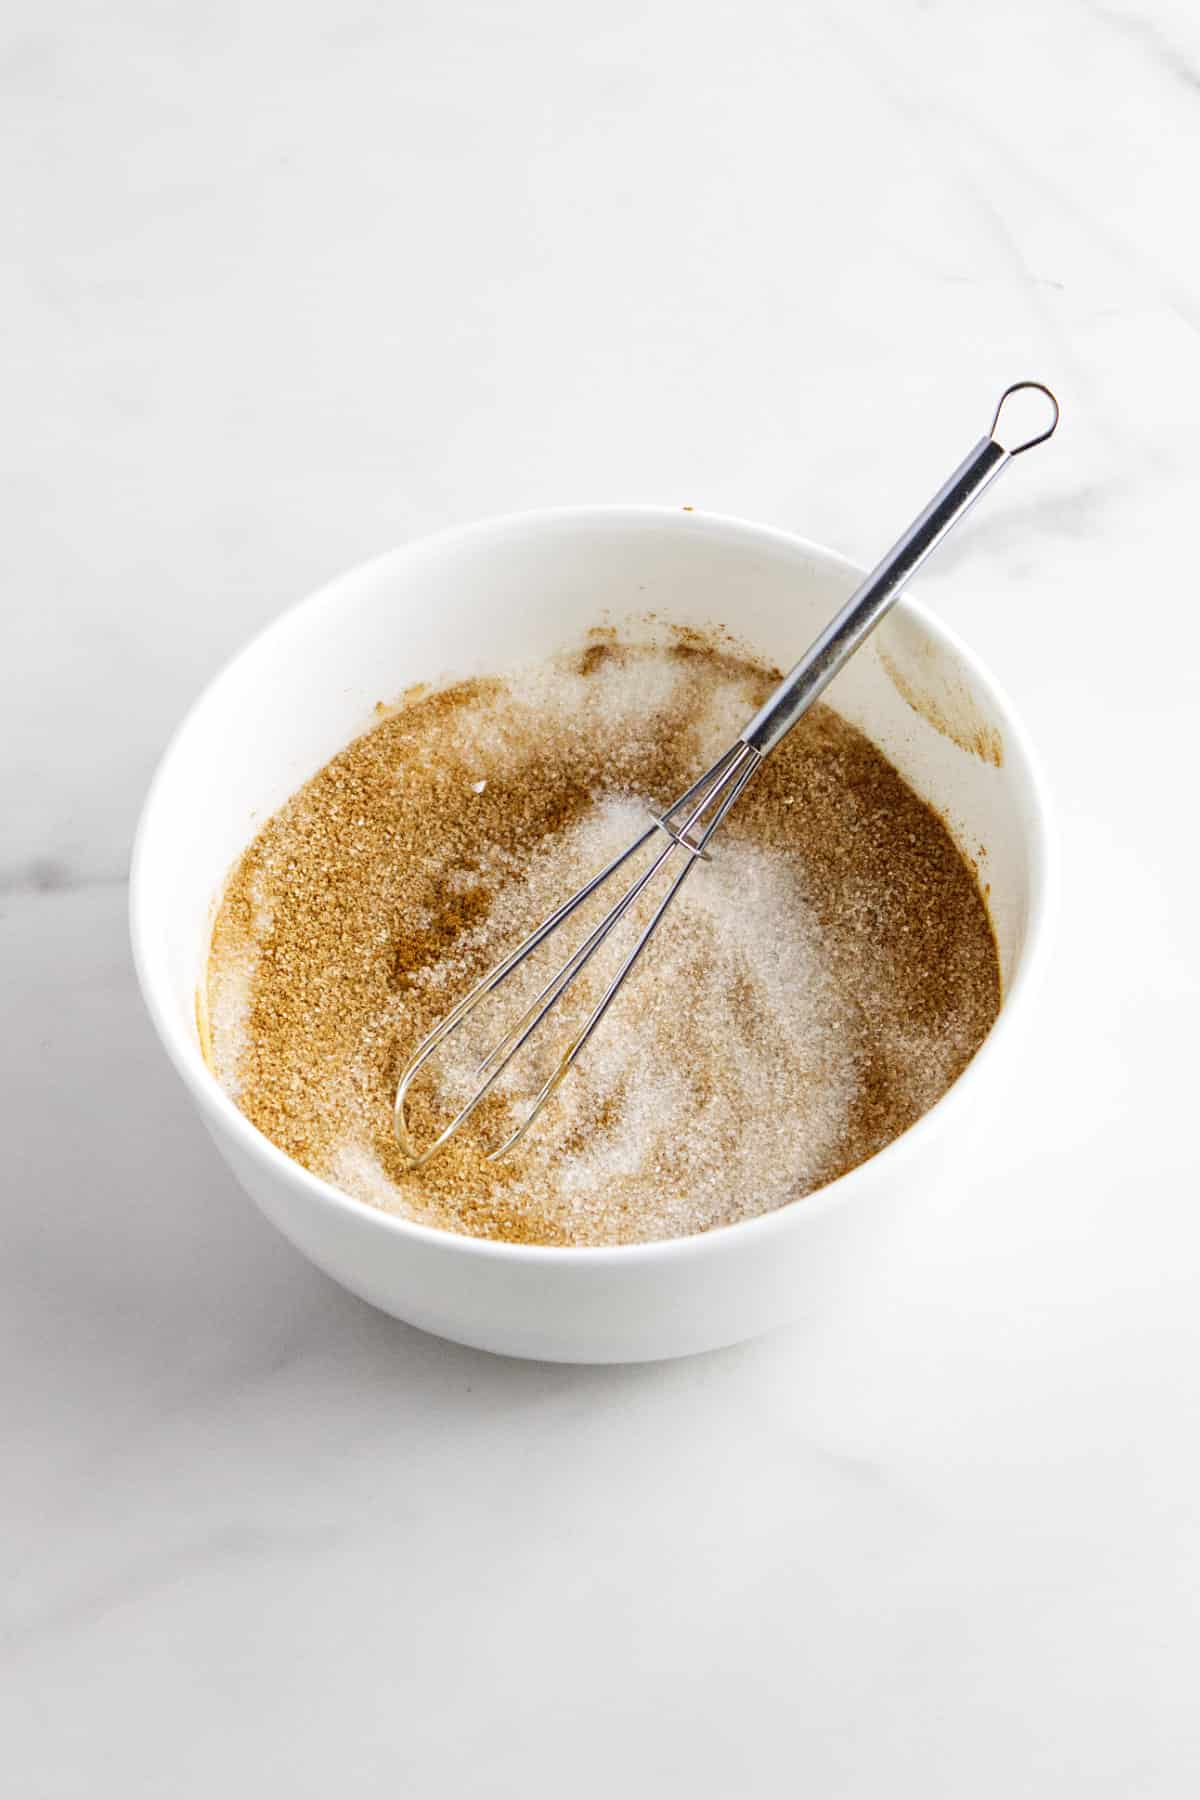 sugar and cinnamon whisked in a small bowl.